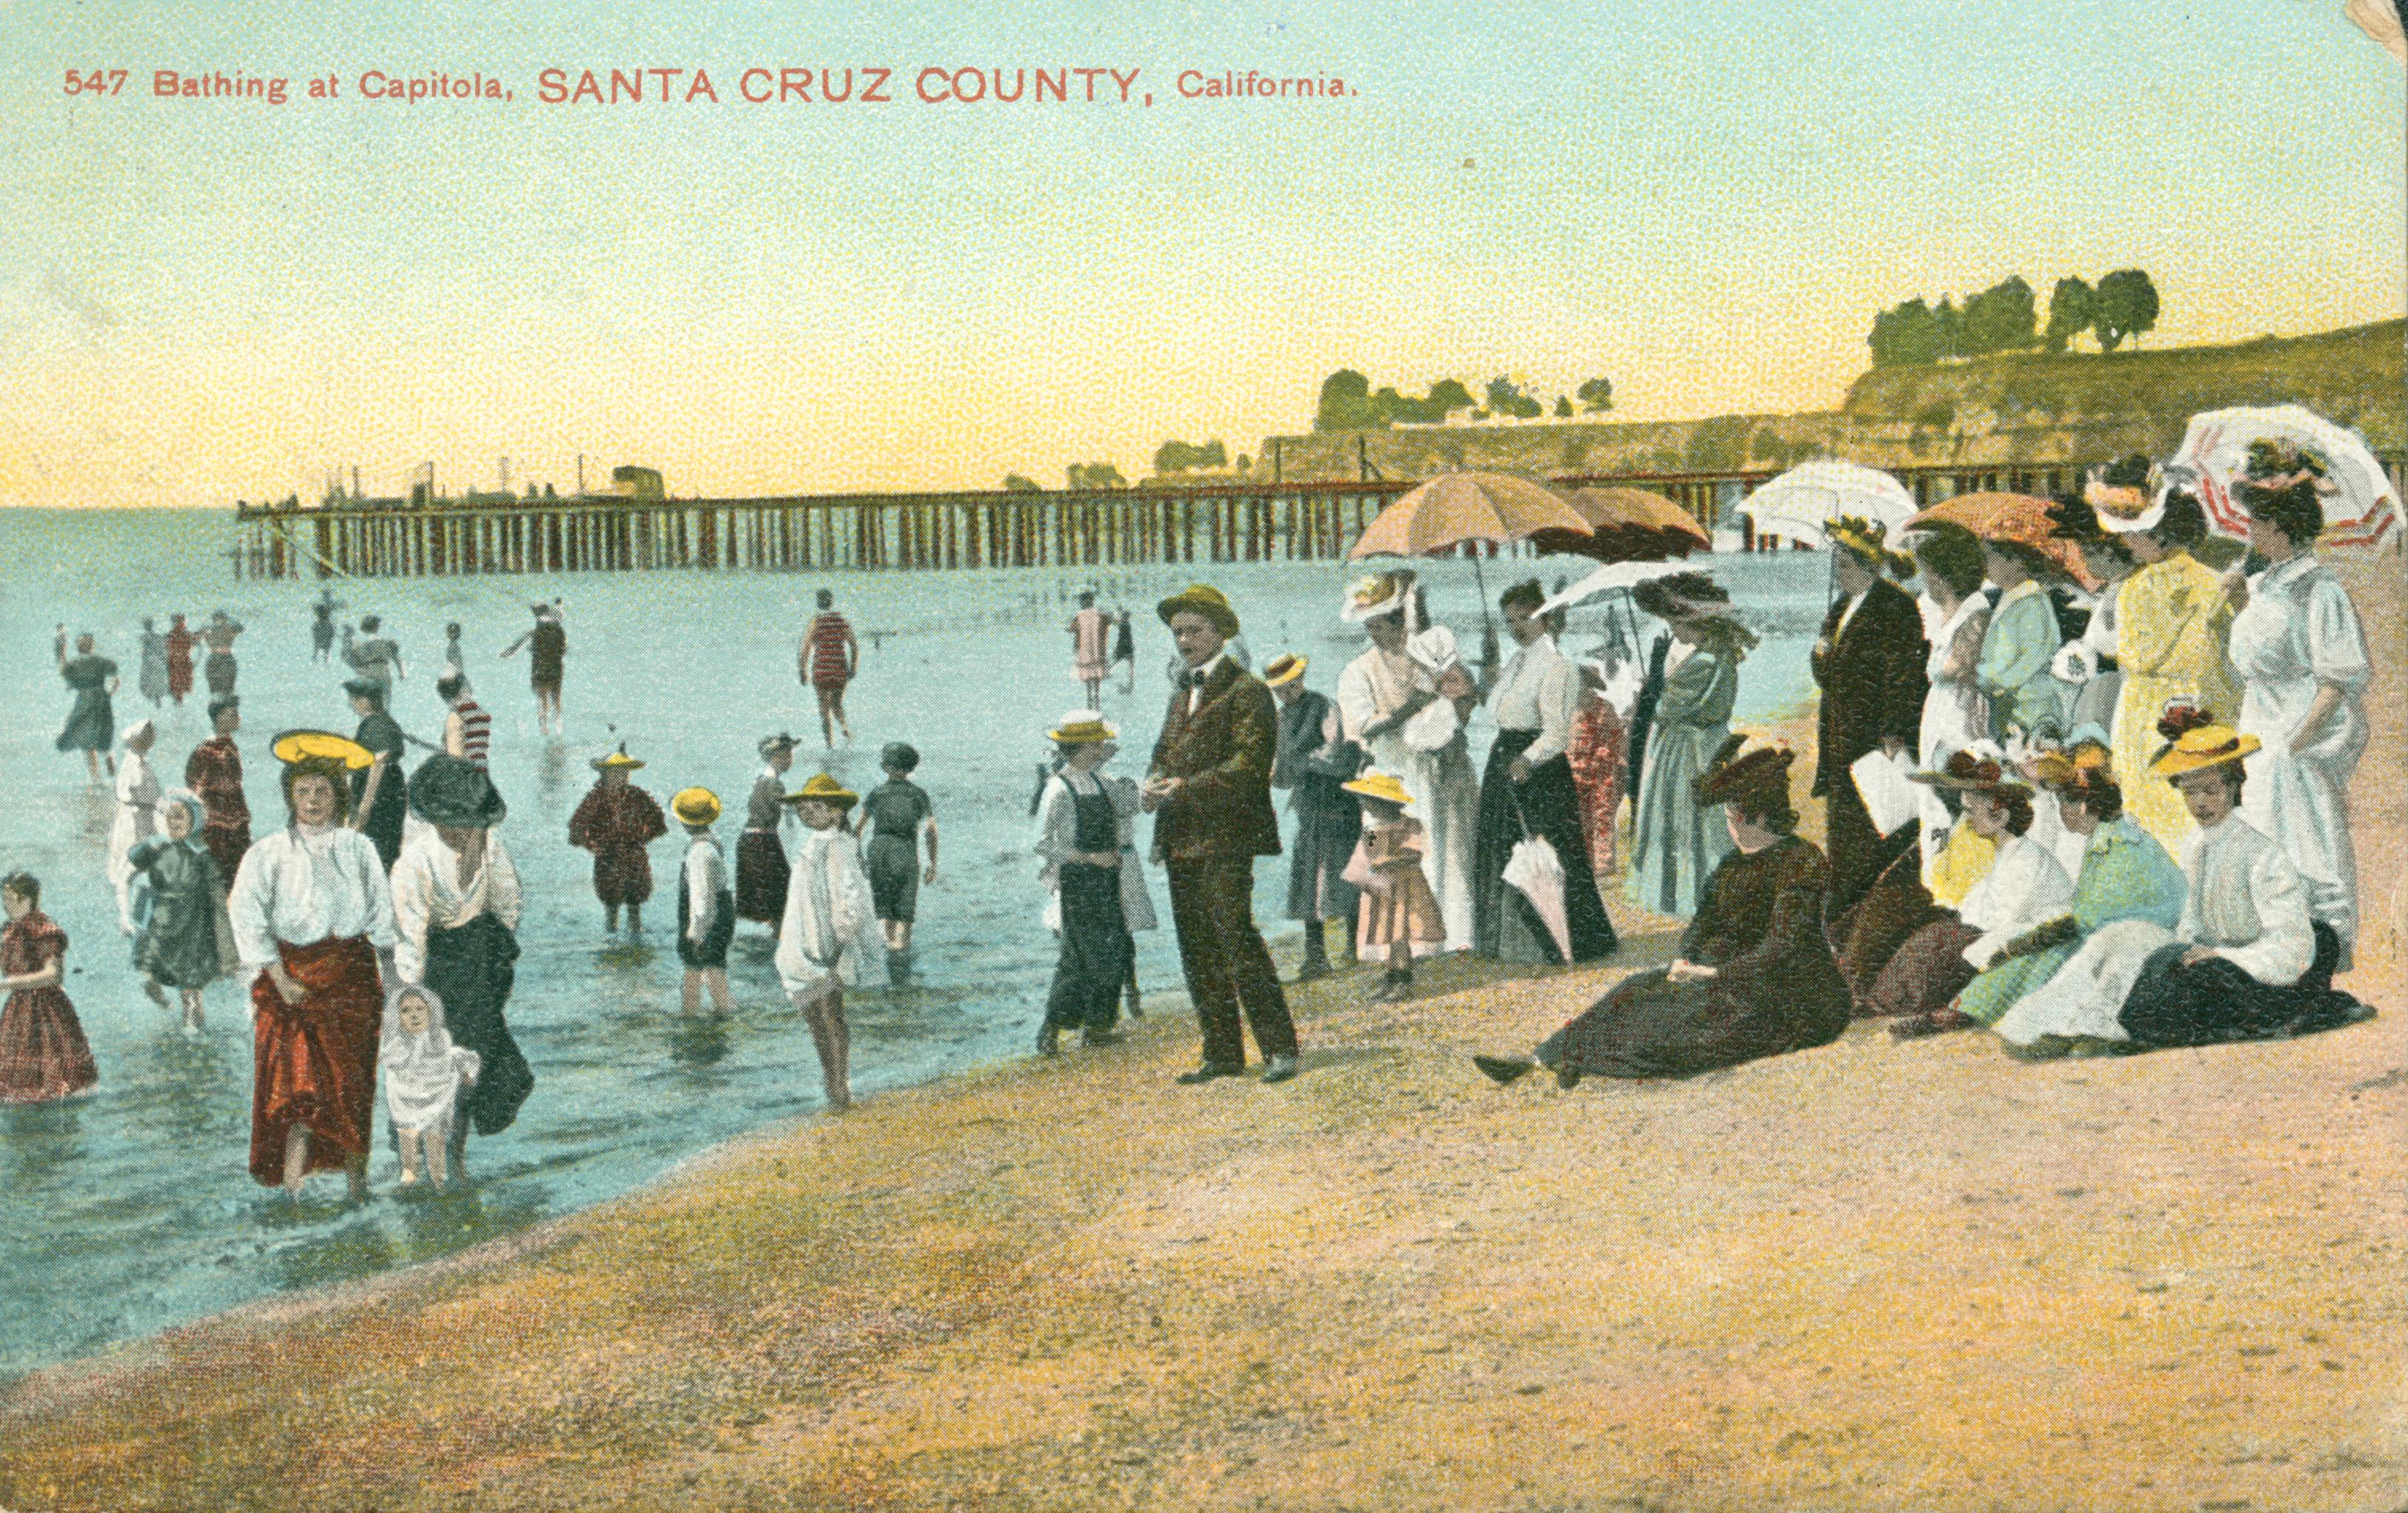 View of people sitting on the beach and swimming in ocean, in front of the casino, exterior view of buildings in background,